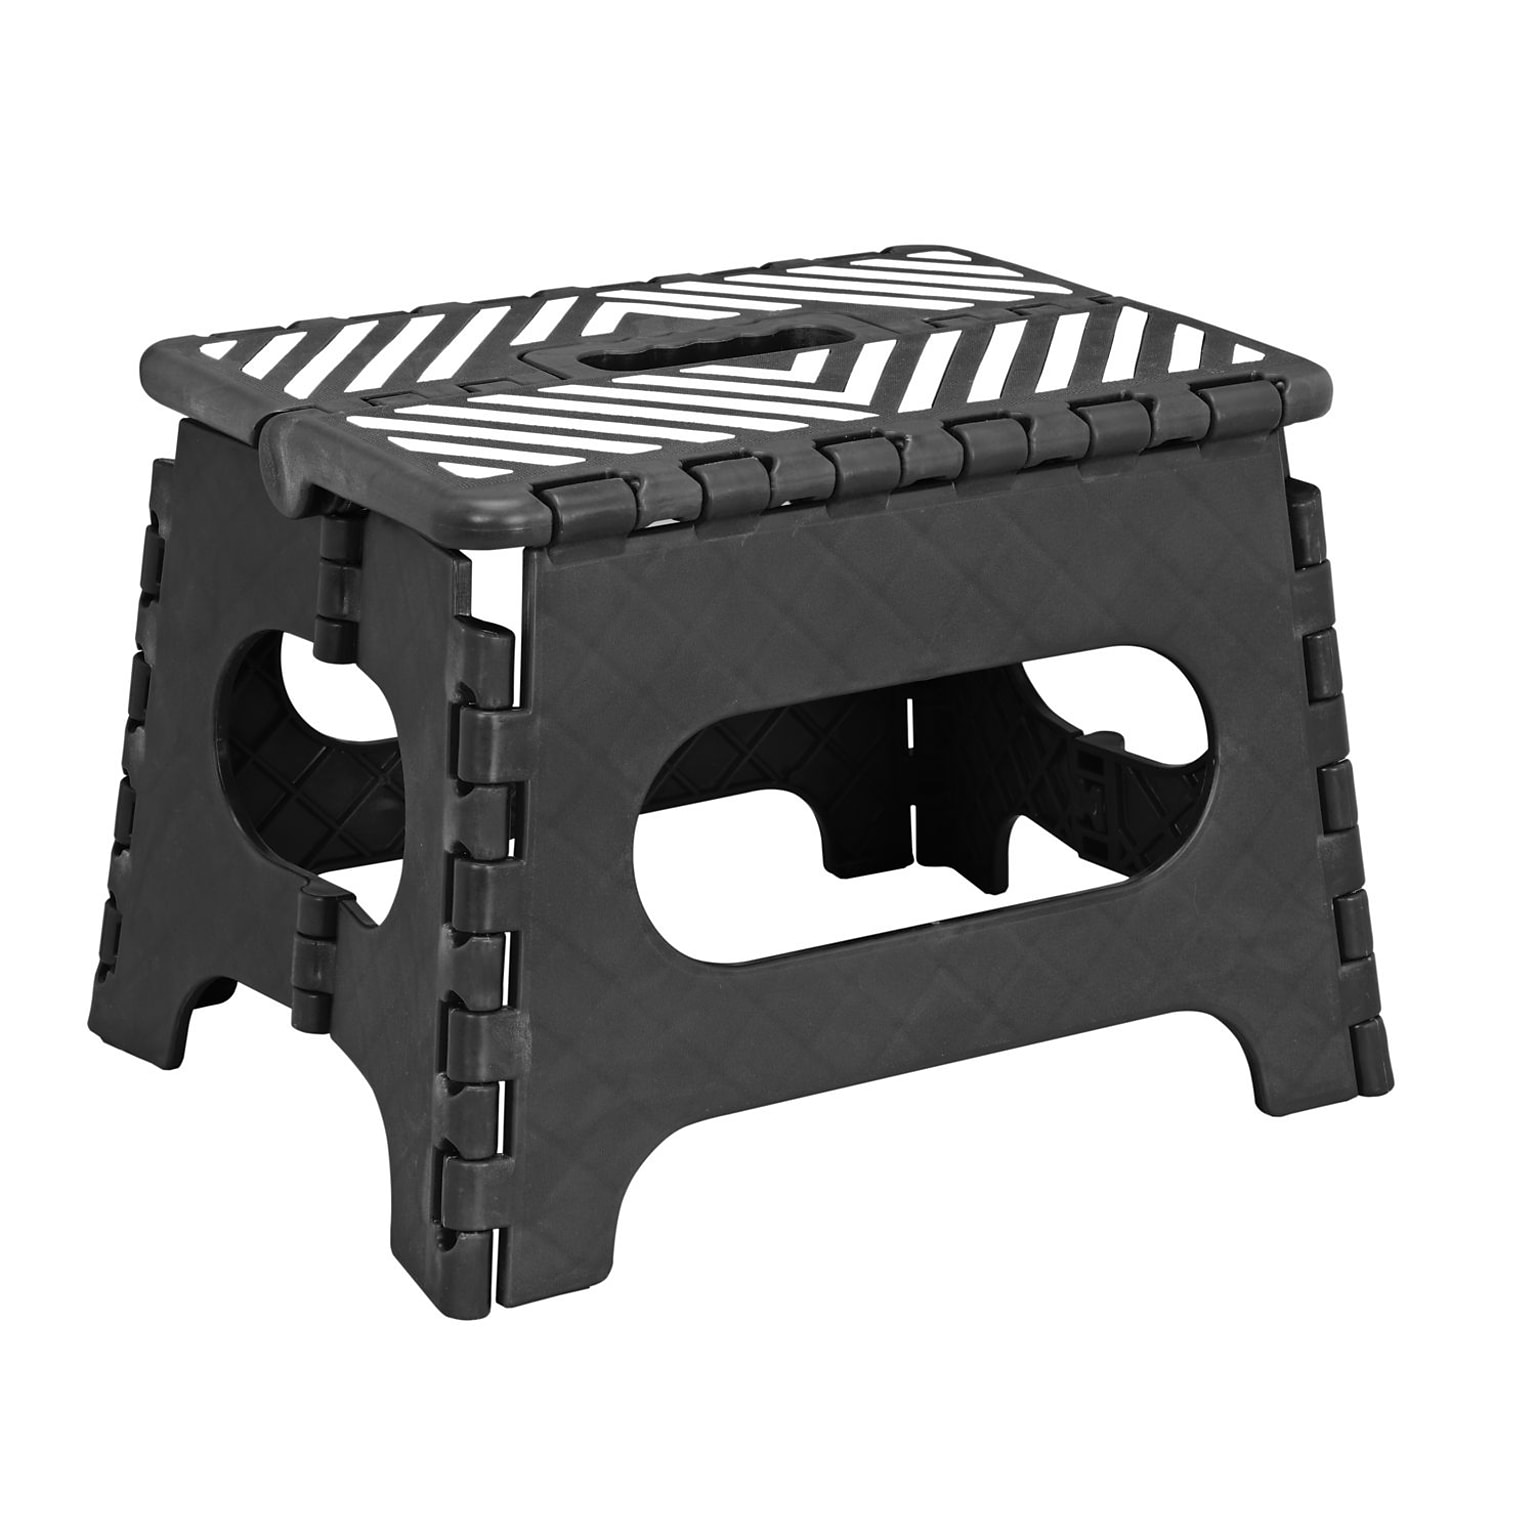 Simplify 9 Collapsible Step Stool